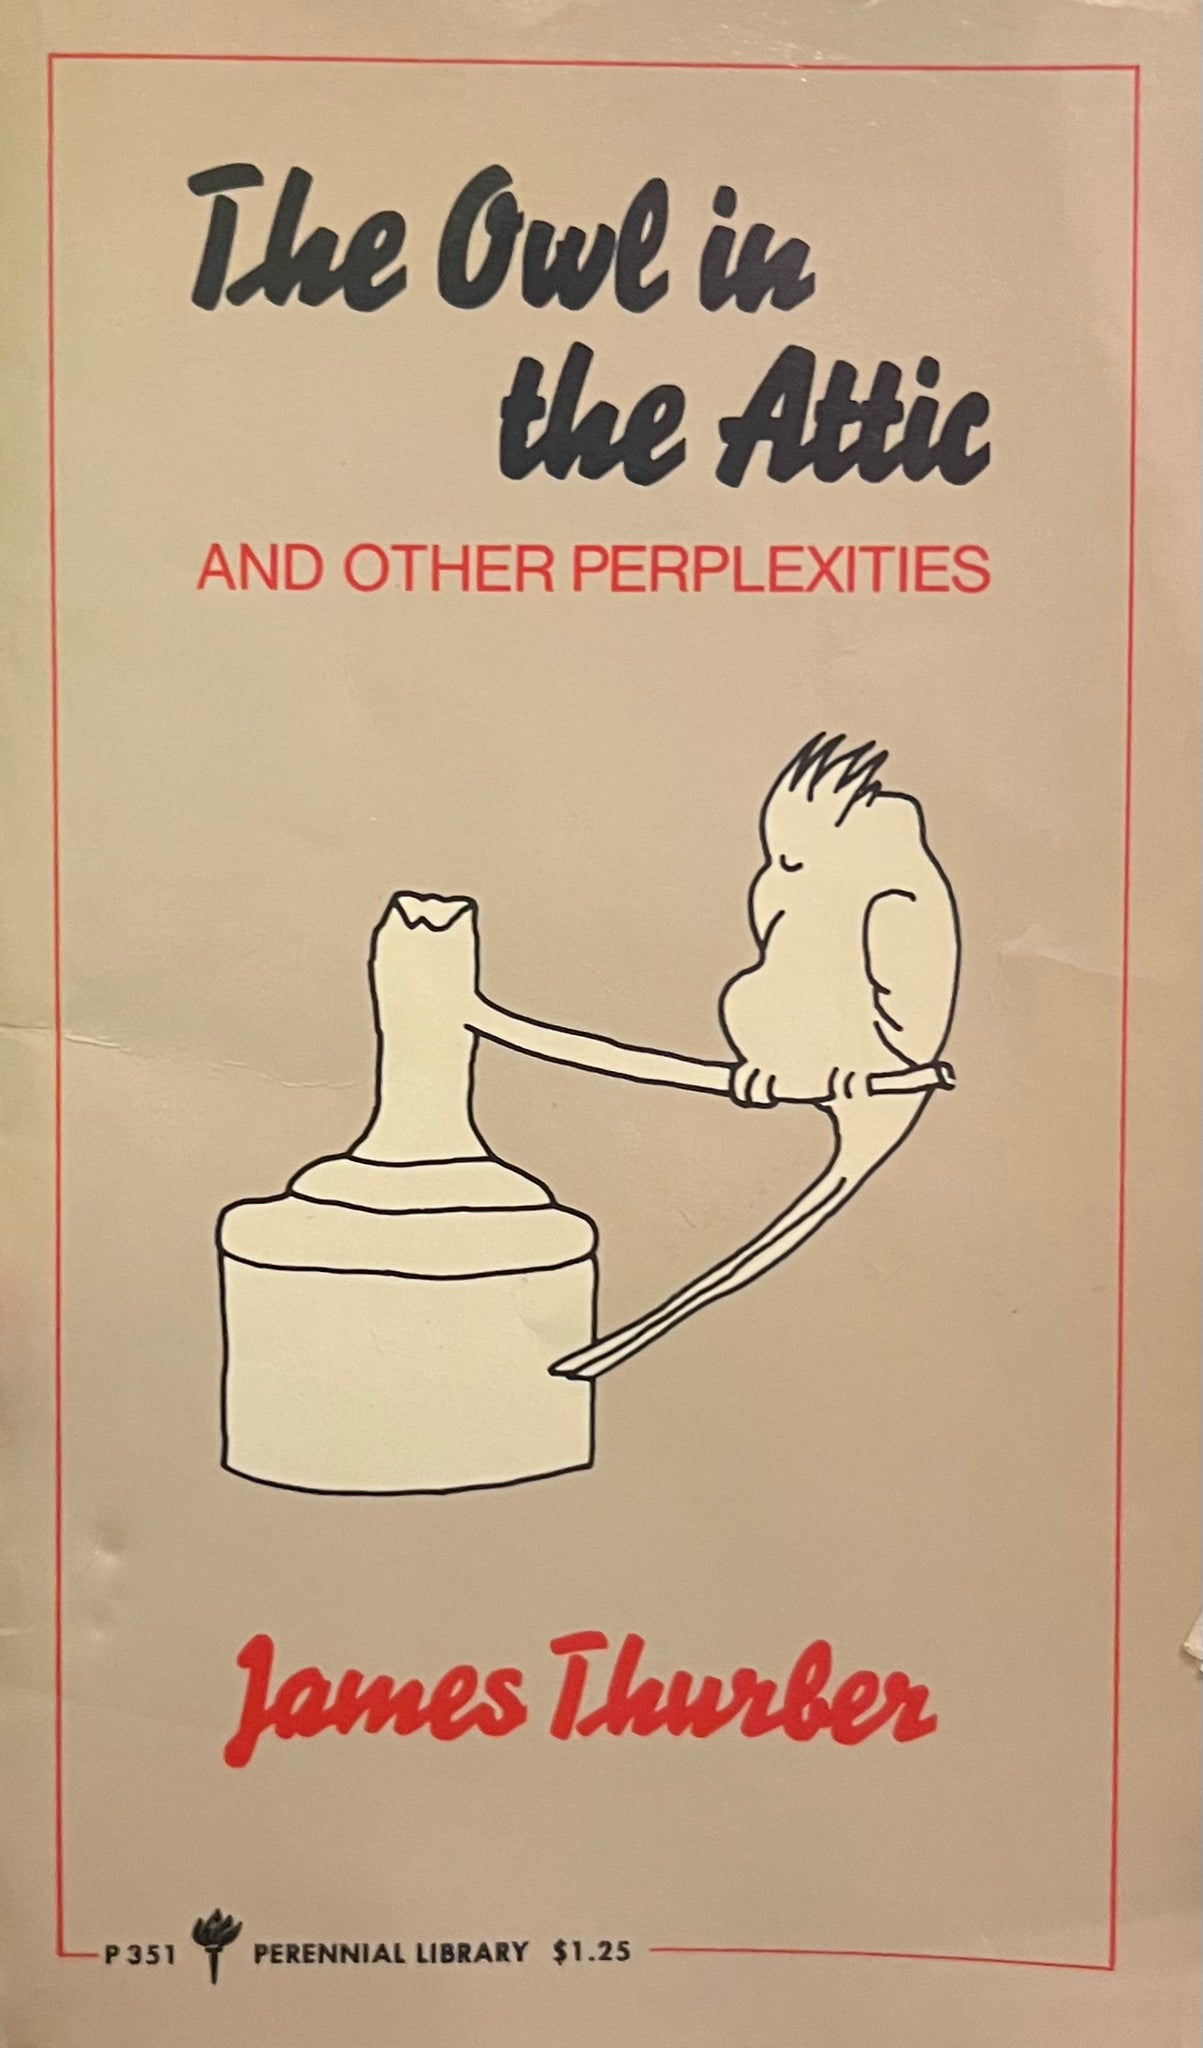 The Owl in the Attic (and Other Perplexities), James Thurber